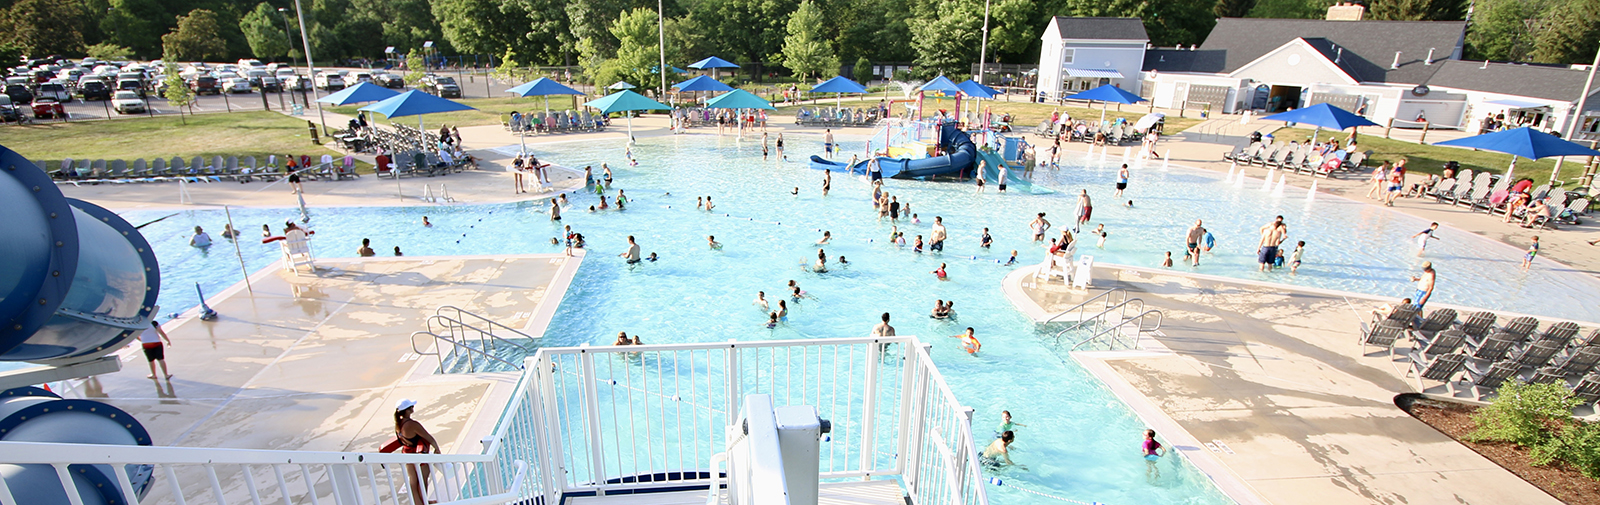 TOSA Pool at Hoyt Park | Friends of Hoyt Park & Pool